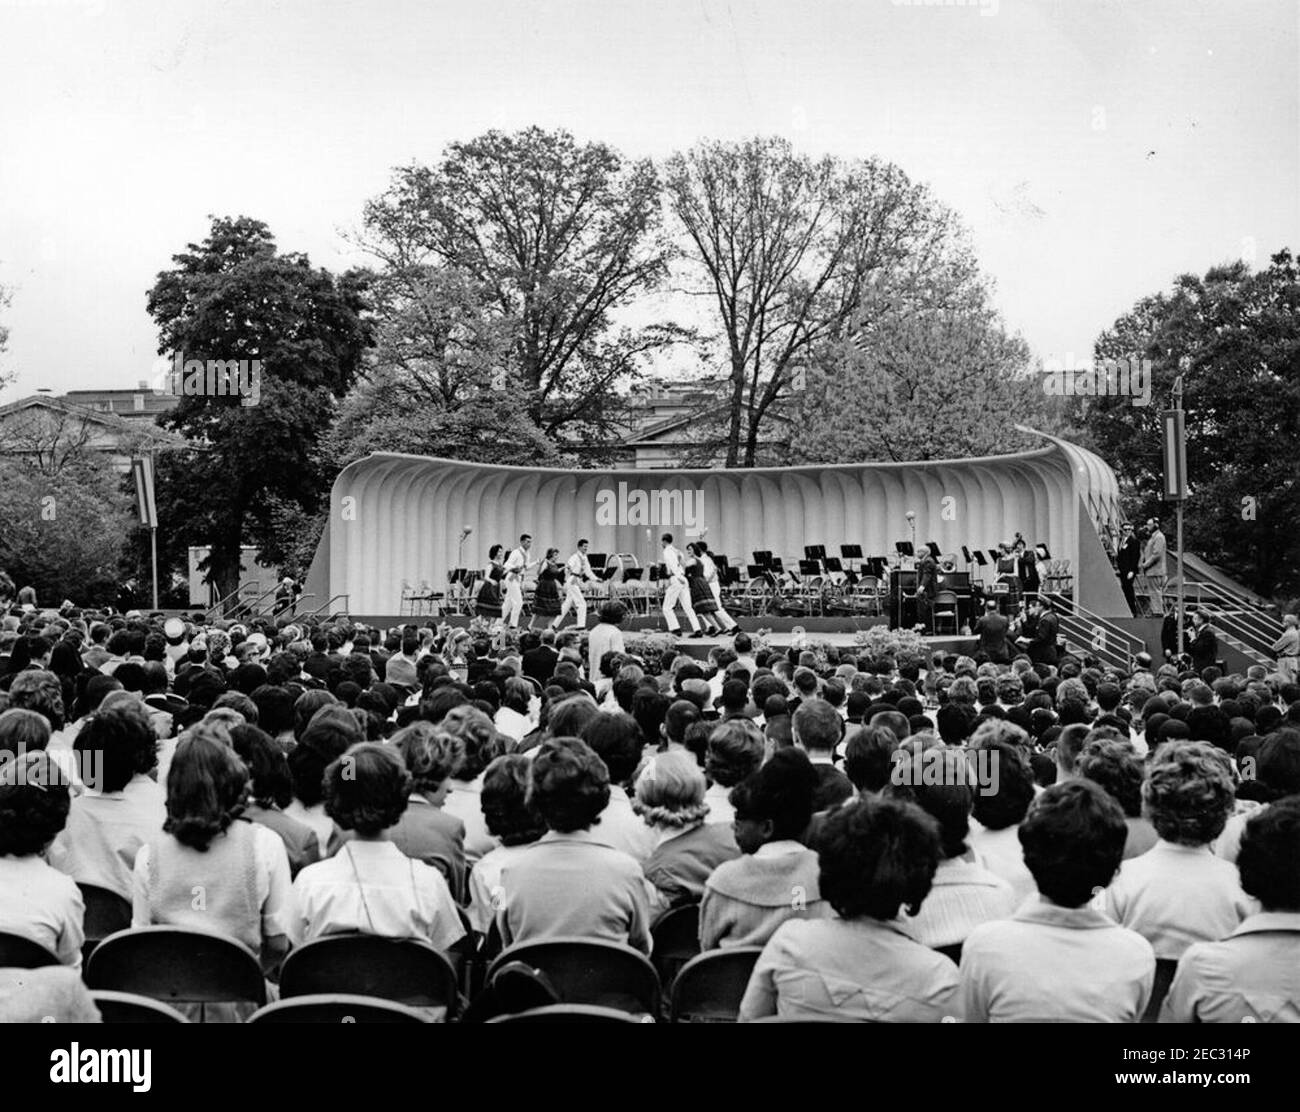 First Lady Jacqueline Kennedyu0027s (JBK) Musical Program for Youth, 2:10PM. An audience assembled on the South Lawn of the White House watches a performance of the Berea (Kentucky) College Country Dancers during the sixth installment of First Lady Jacqueline Kennedyu2019s Musical Programs for Youth by Youth. Washington, D.C. Stock Photo